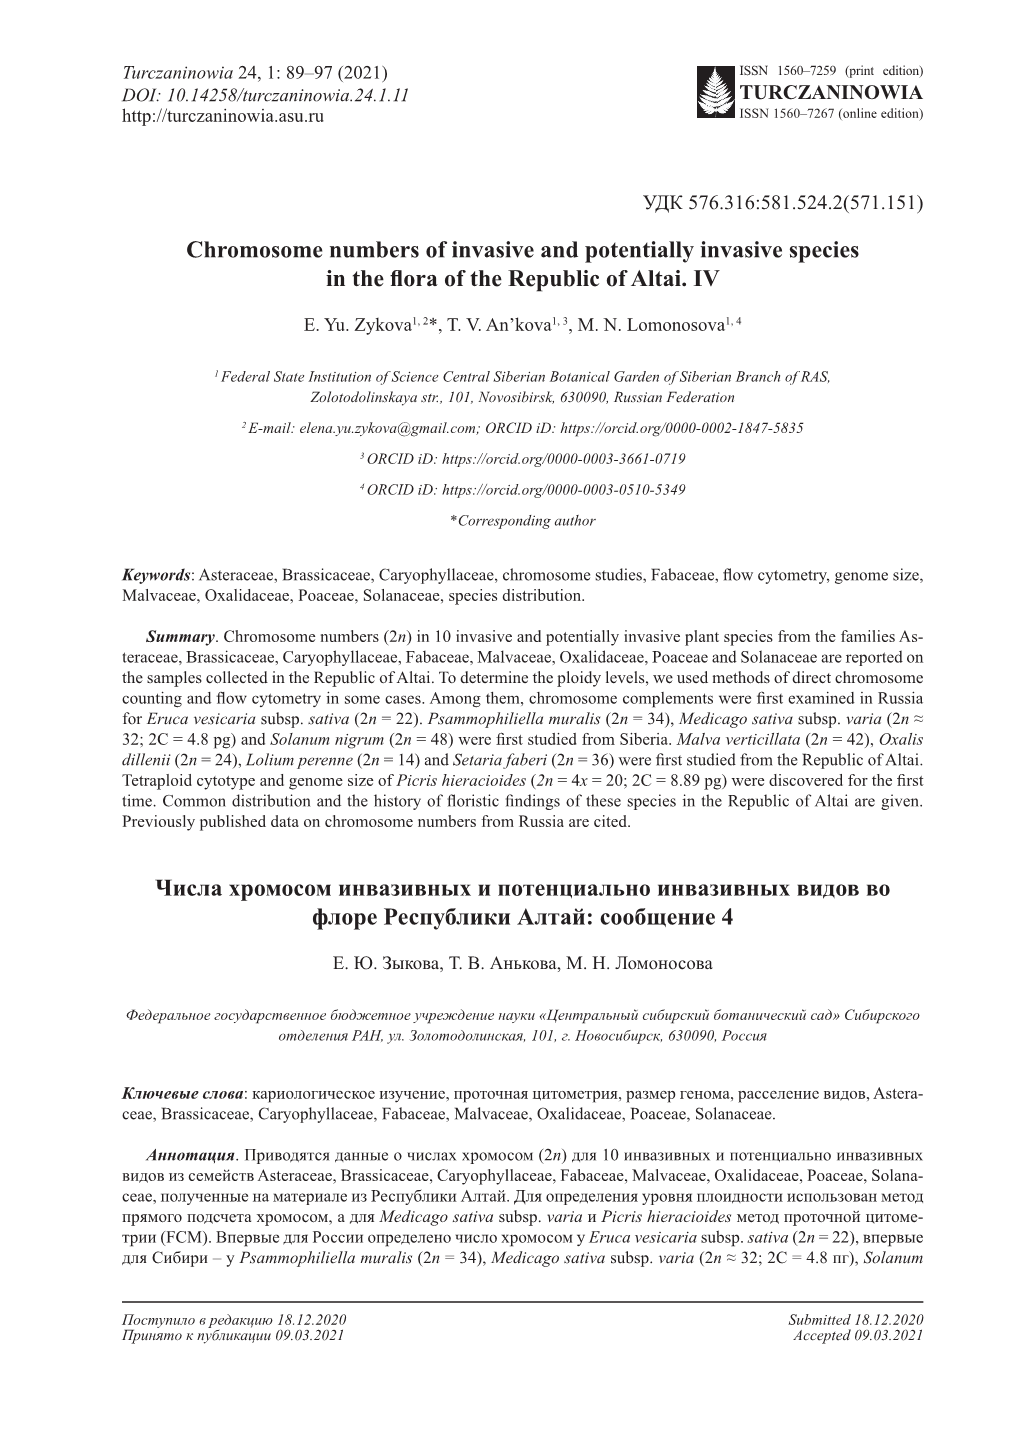 Chromosome Numbers of Invasive and Potentially Invasive Species in the Flora of the Republic of Altai